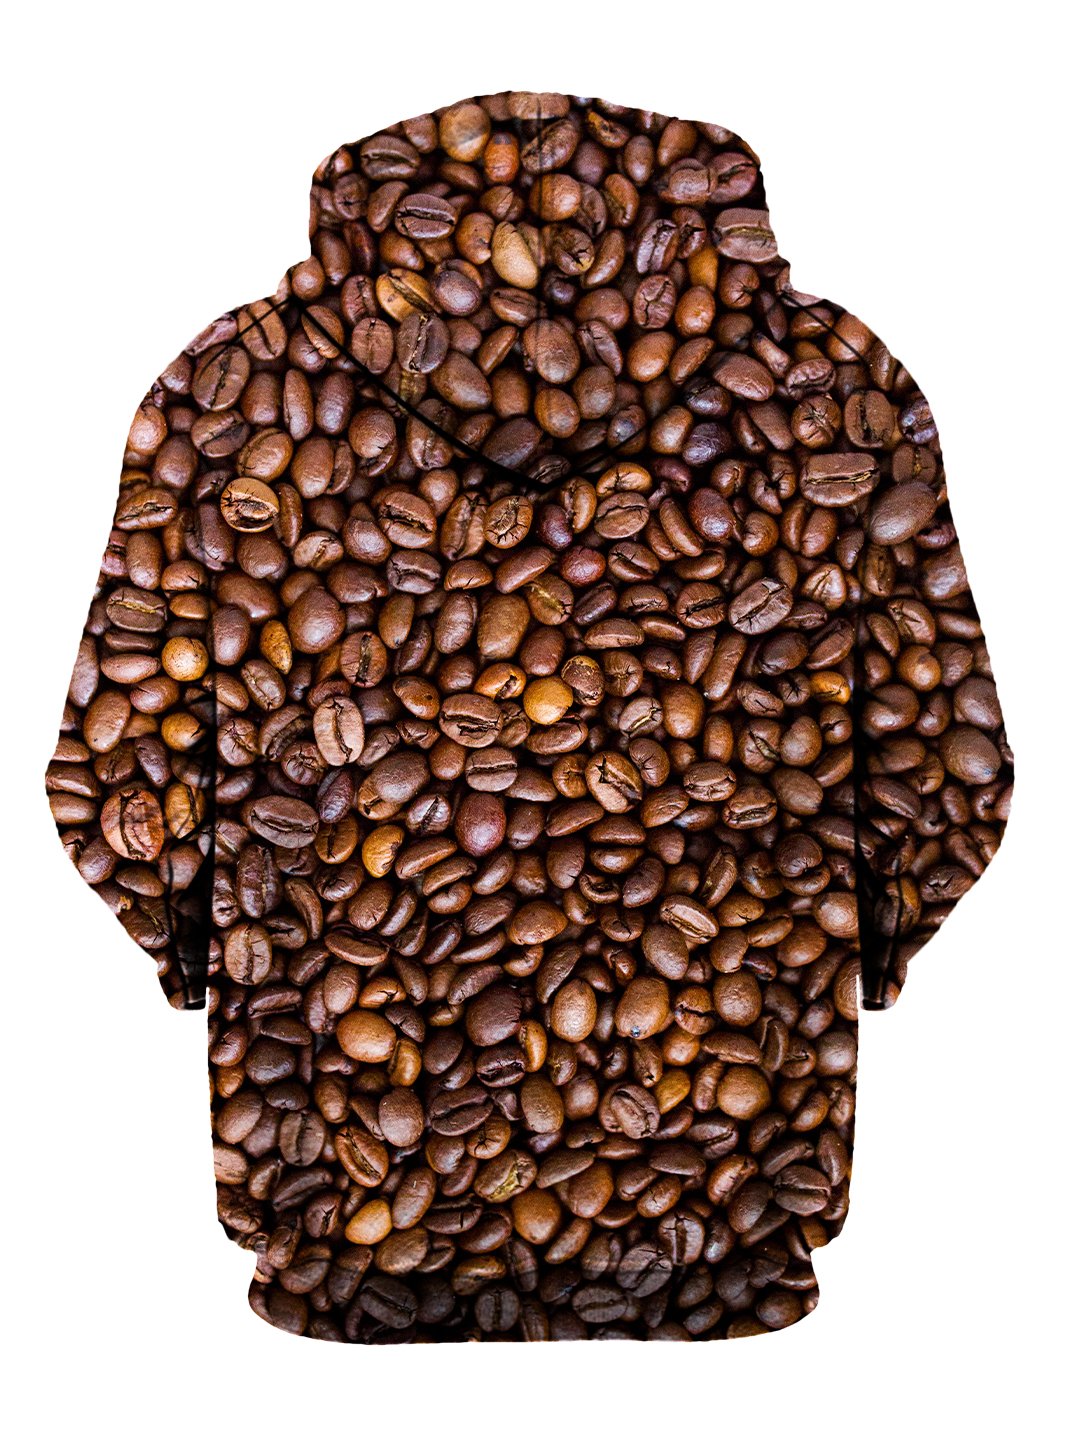 Back view of all over print coffee bean hoody by Gratefully Dyed Apparel